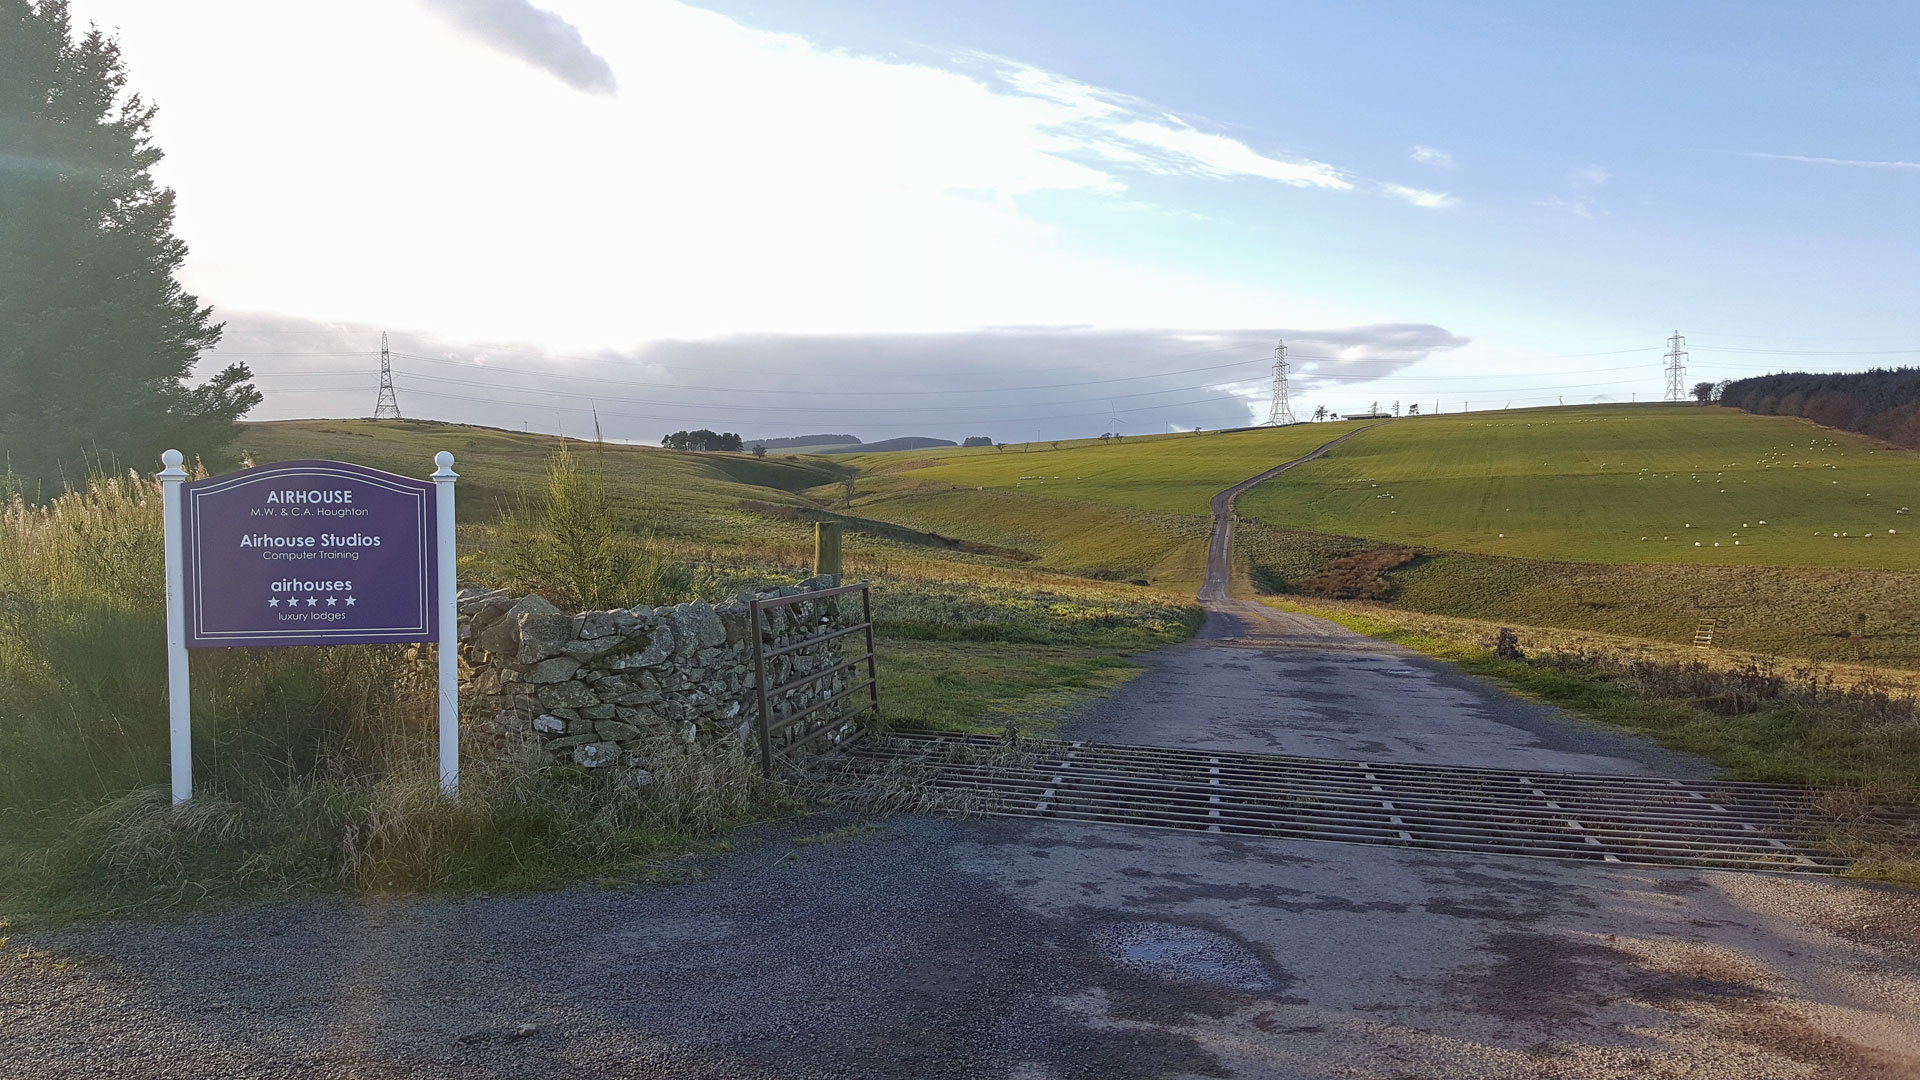 Entrance to Airhouses Luxury Lodges in Scottish Borders.